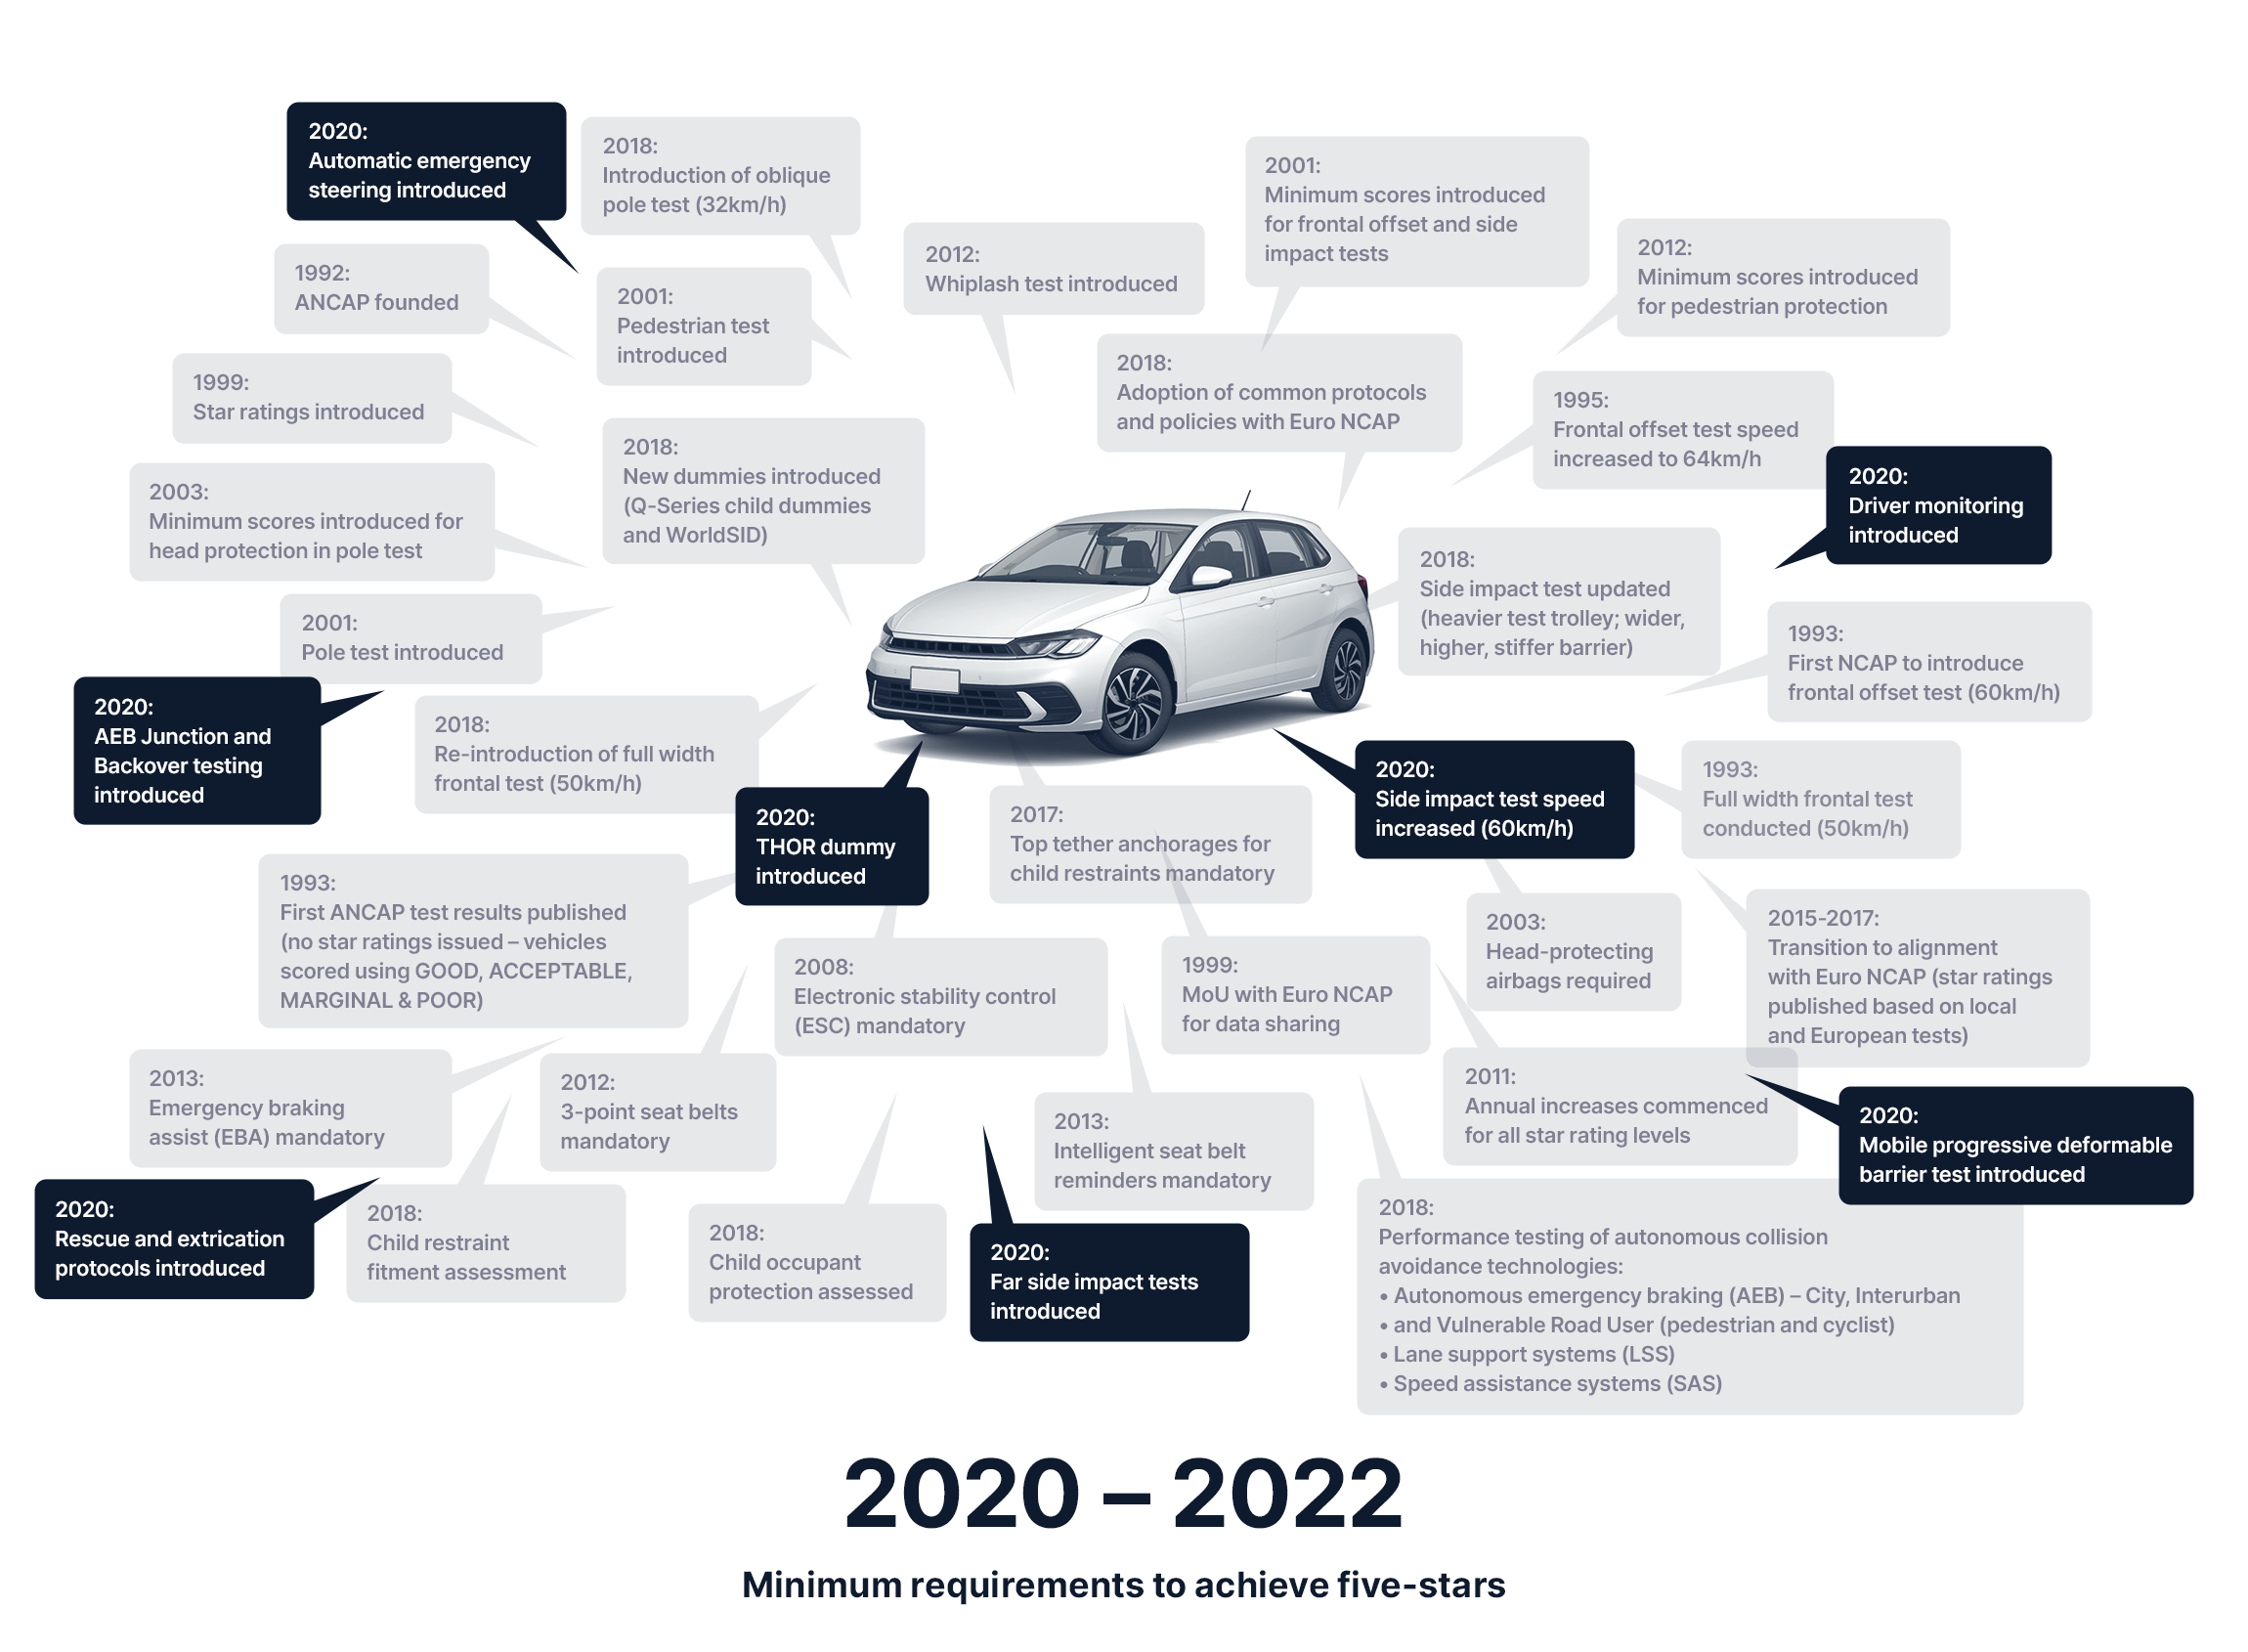 Minimum requirements to achieve an ANCAP Safety Rating in 2020 - 2022